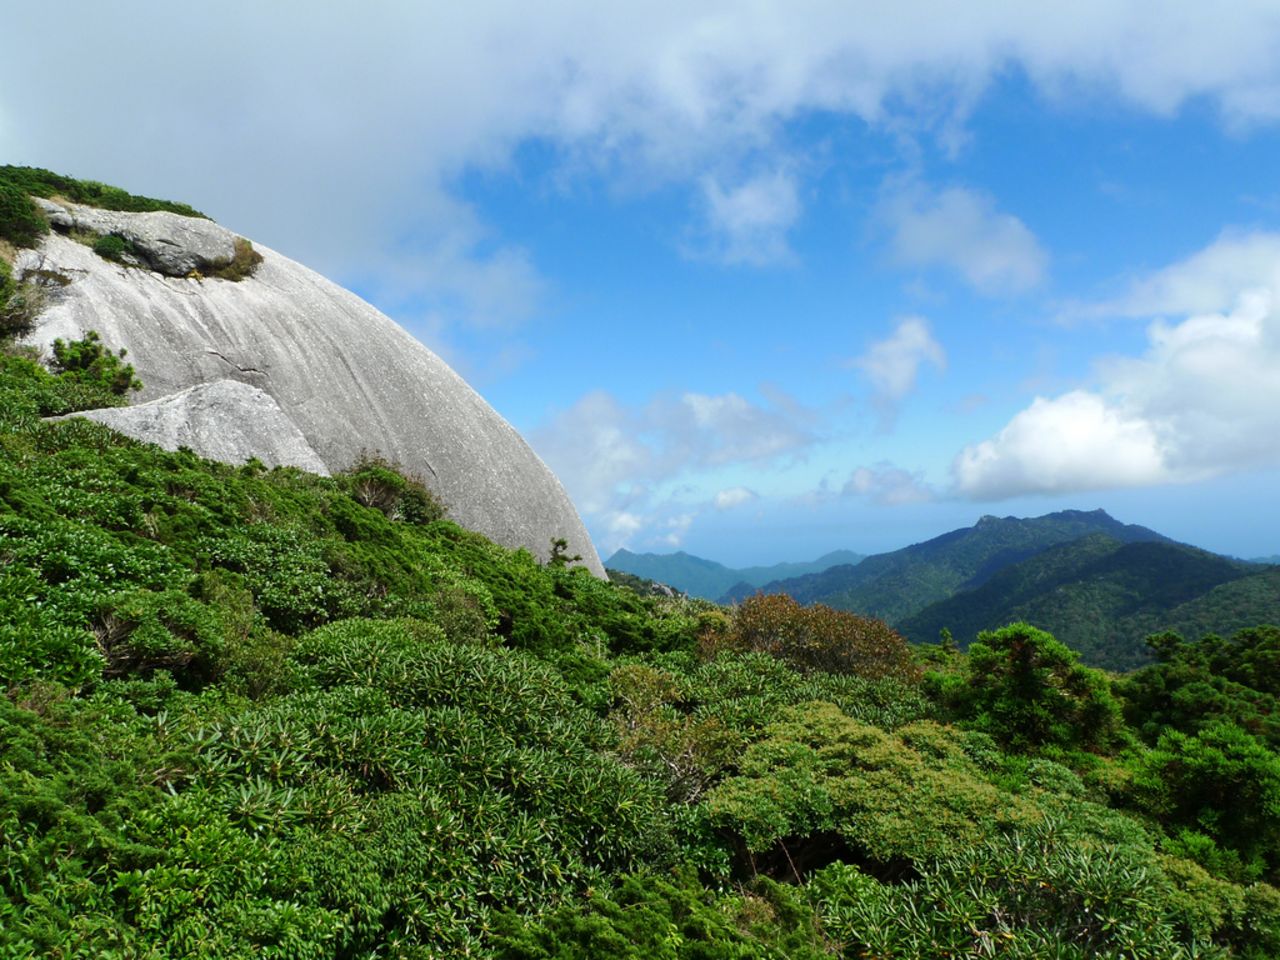 A walk along the Yodagawa trail takes you to some of the island's peaks.